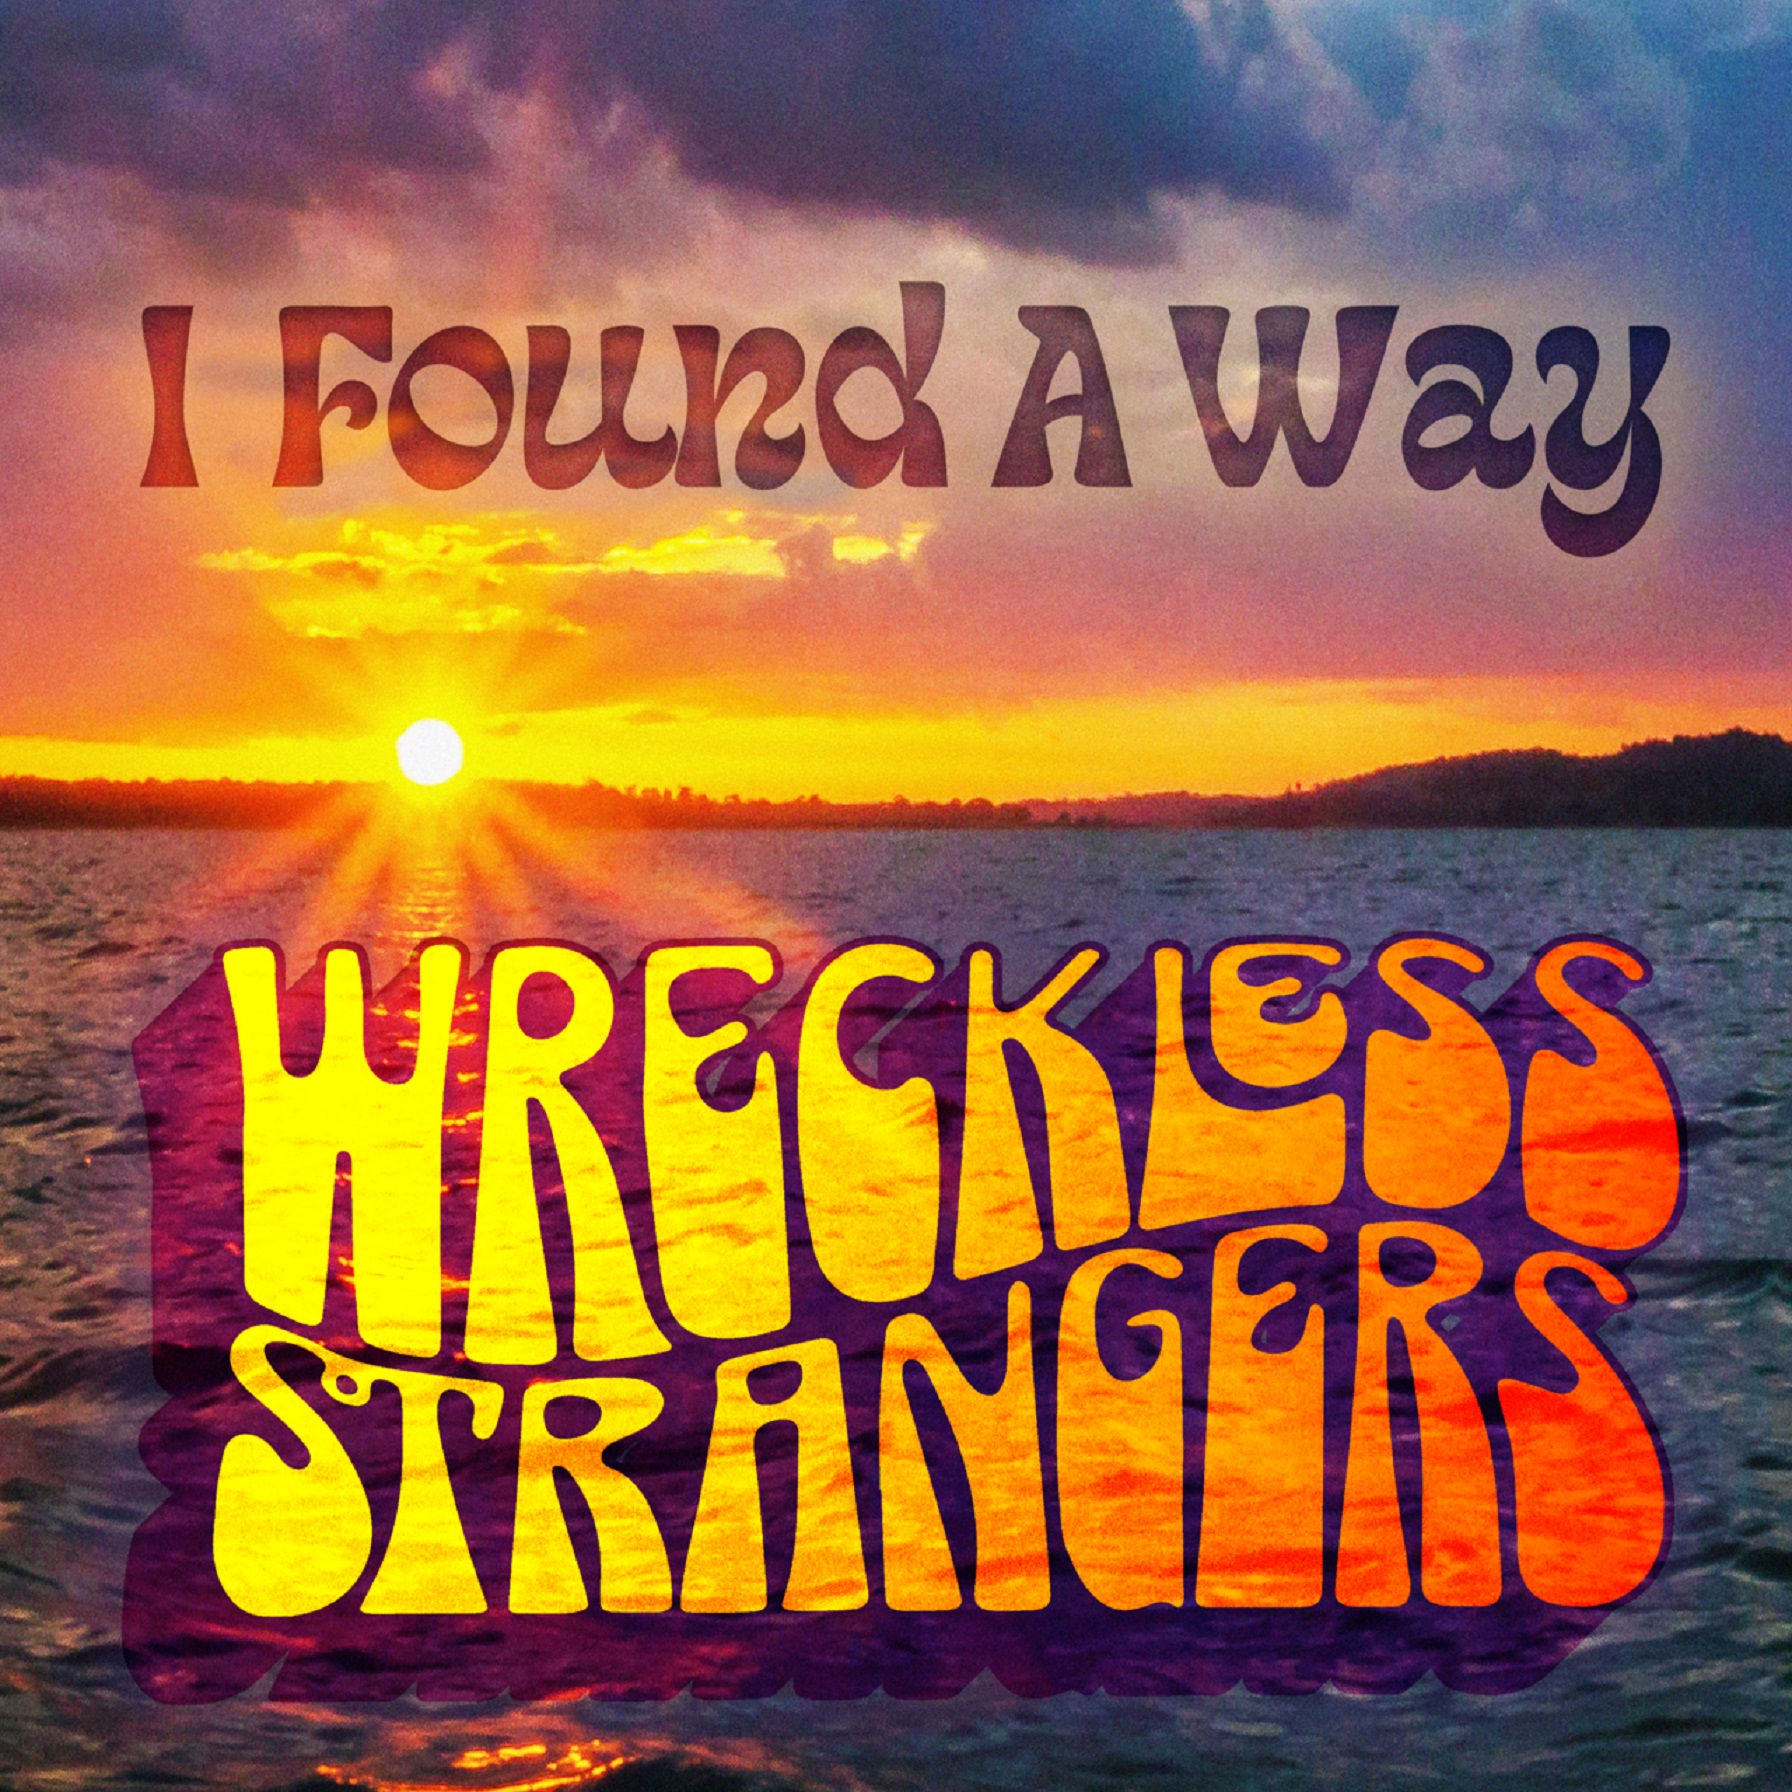 Wreckless Strangers Release First Single "I Found A Way" Ahead of New EP Release